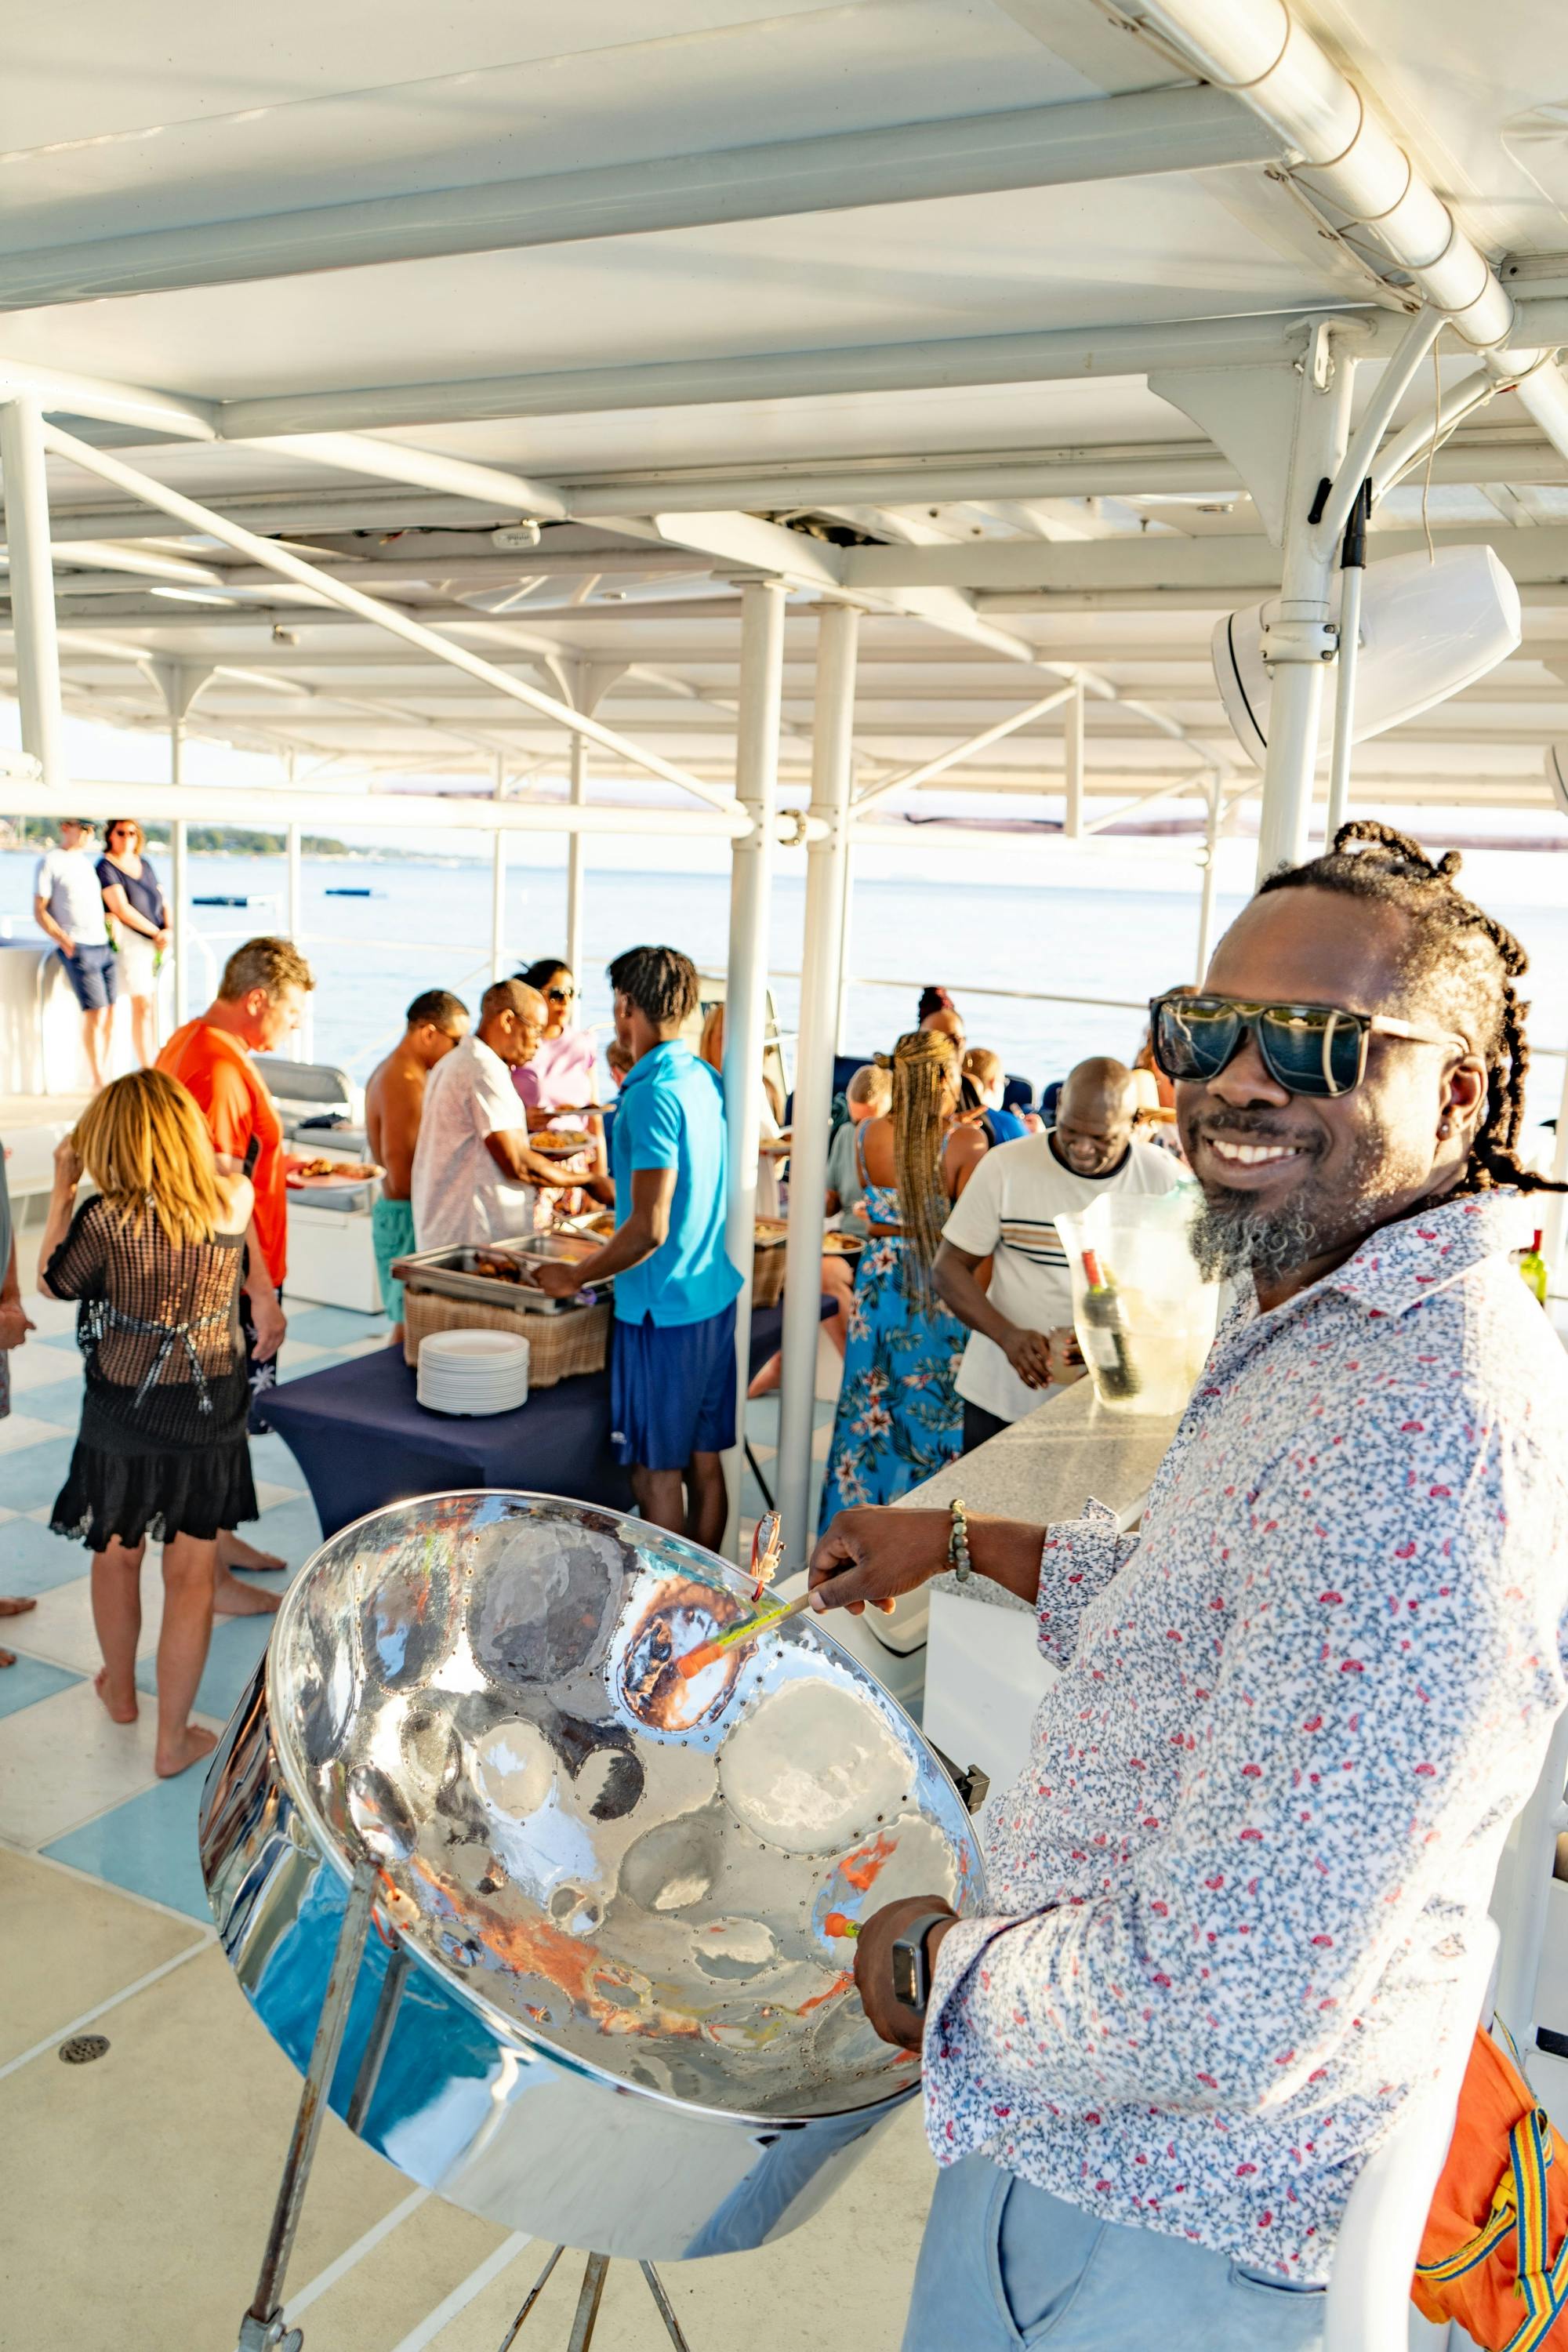 Barbados Sunset Cruise with Live Steel Pan Music